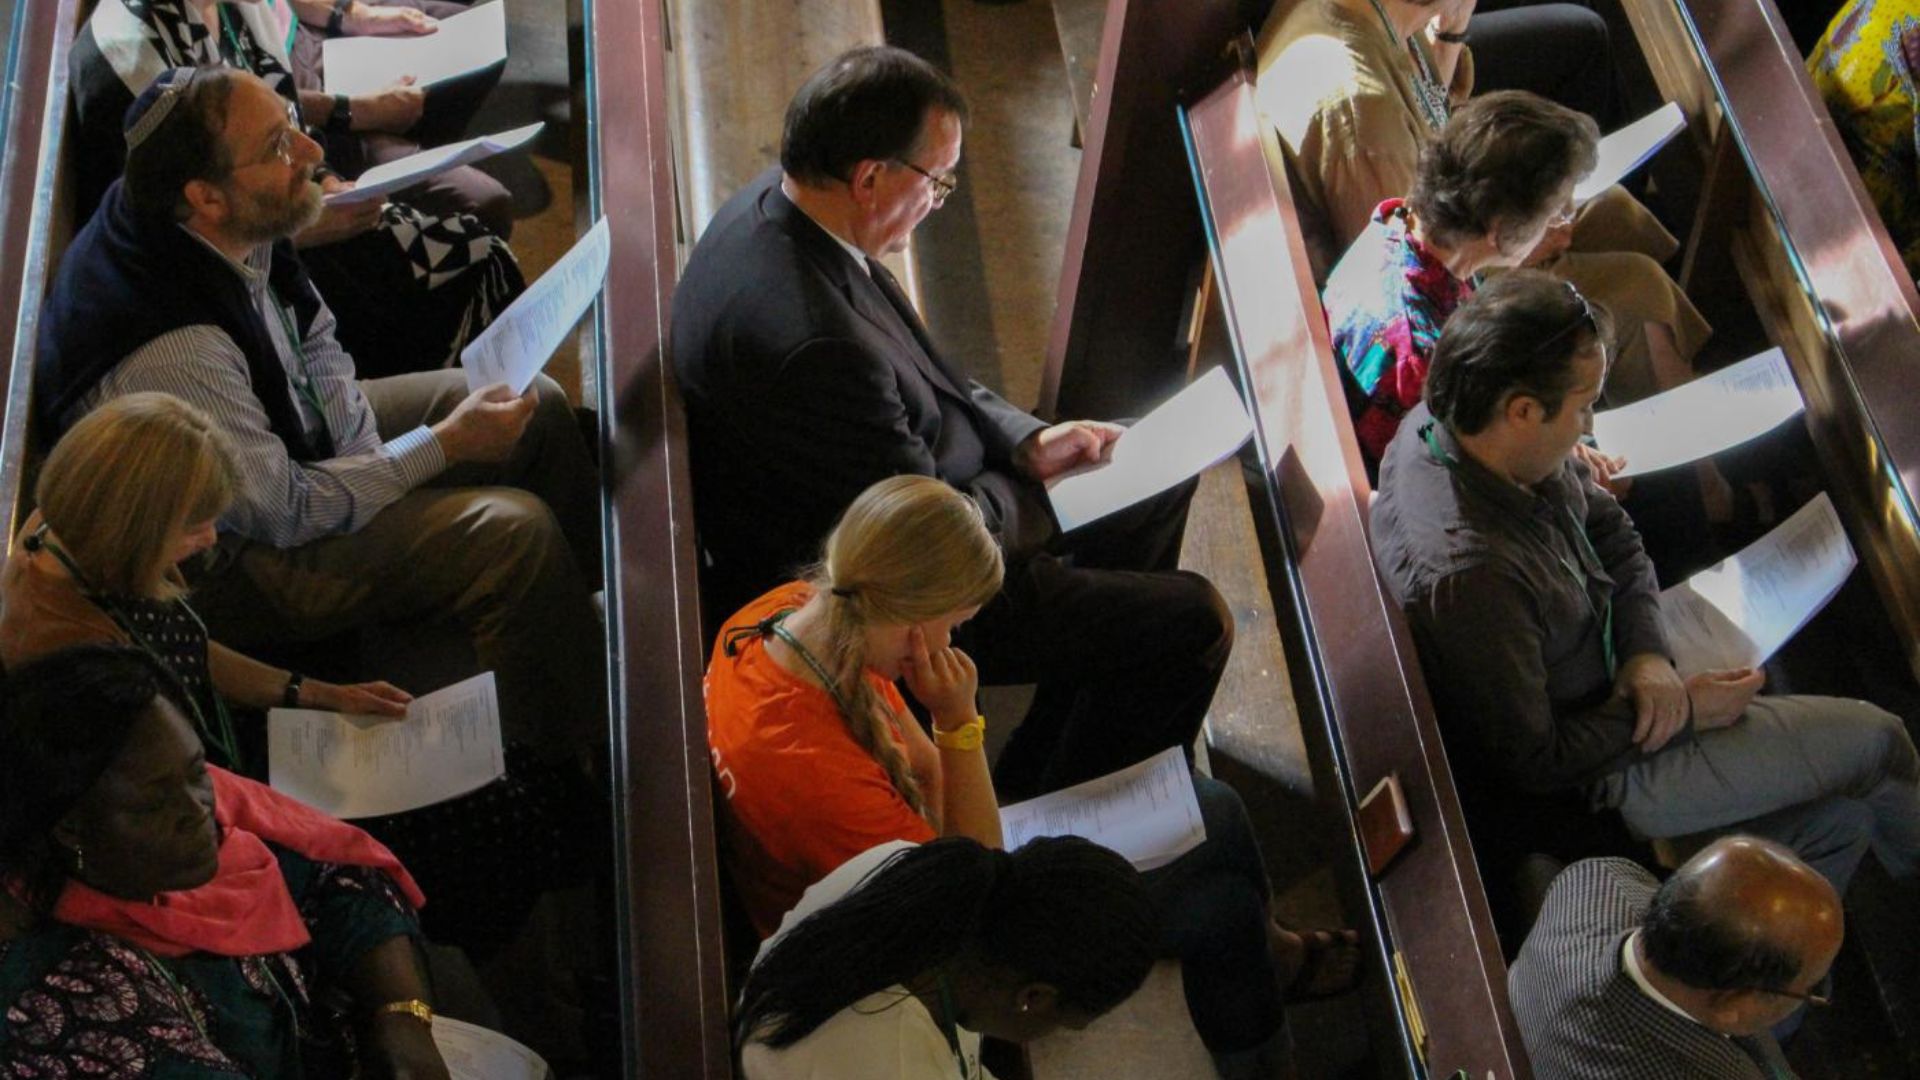 people sitting in a church reading papers showing the influence of religion on society